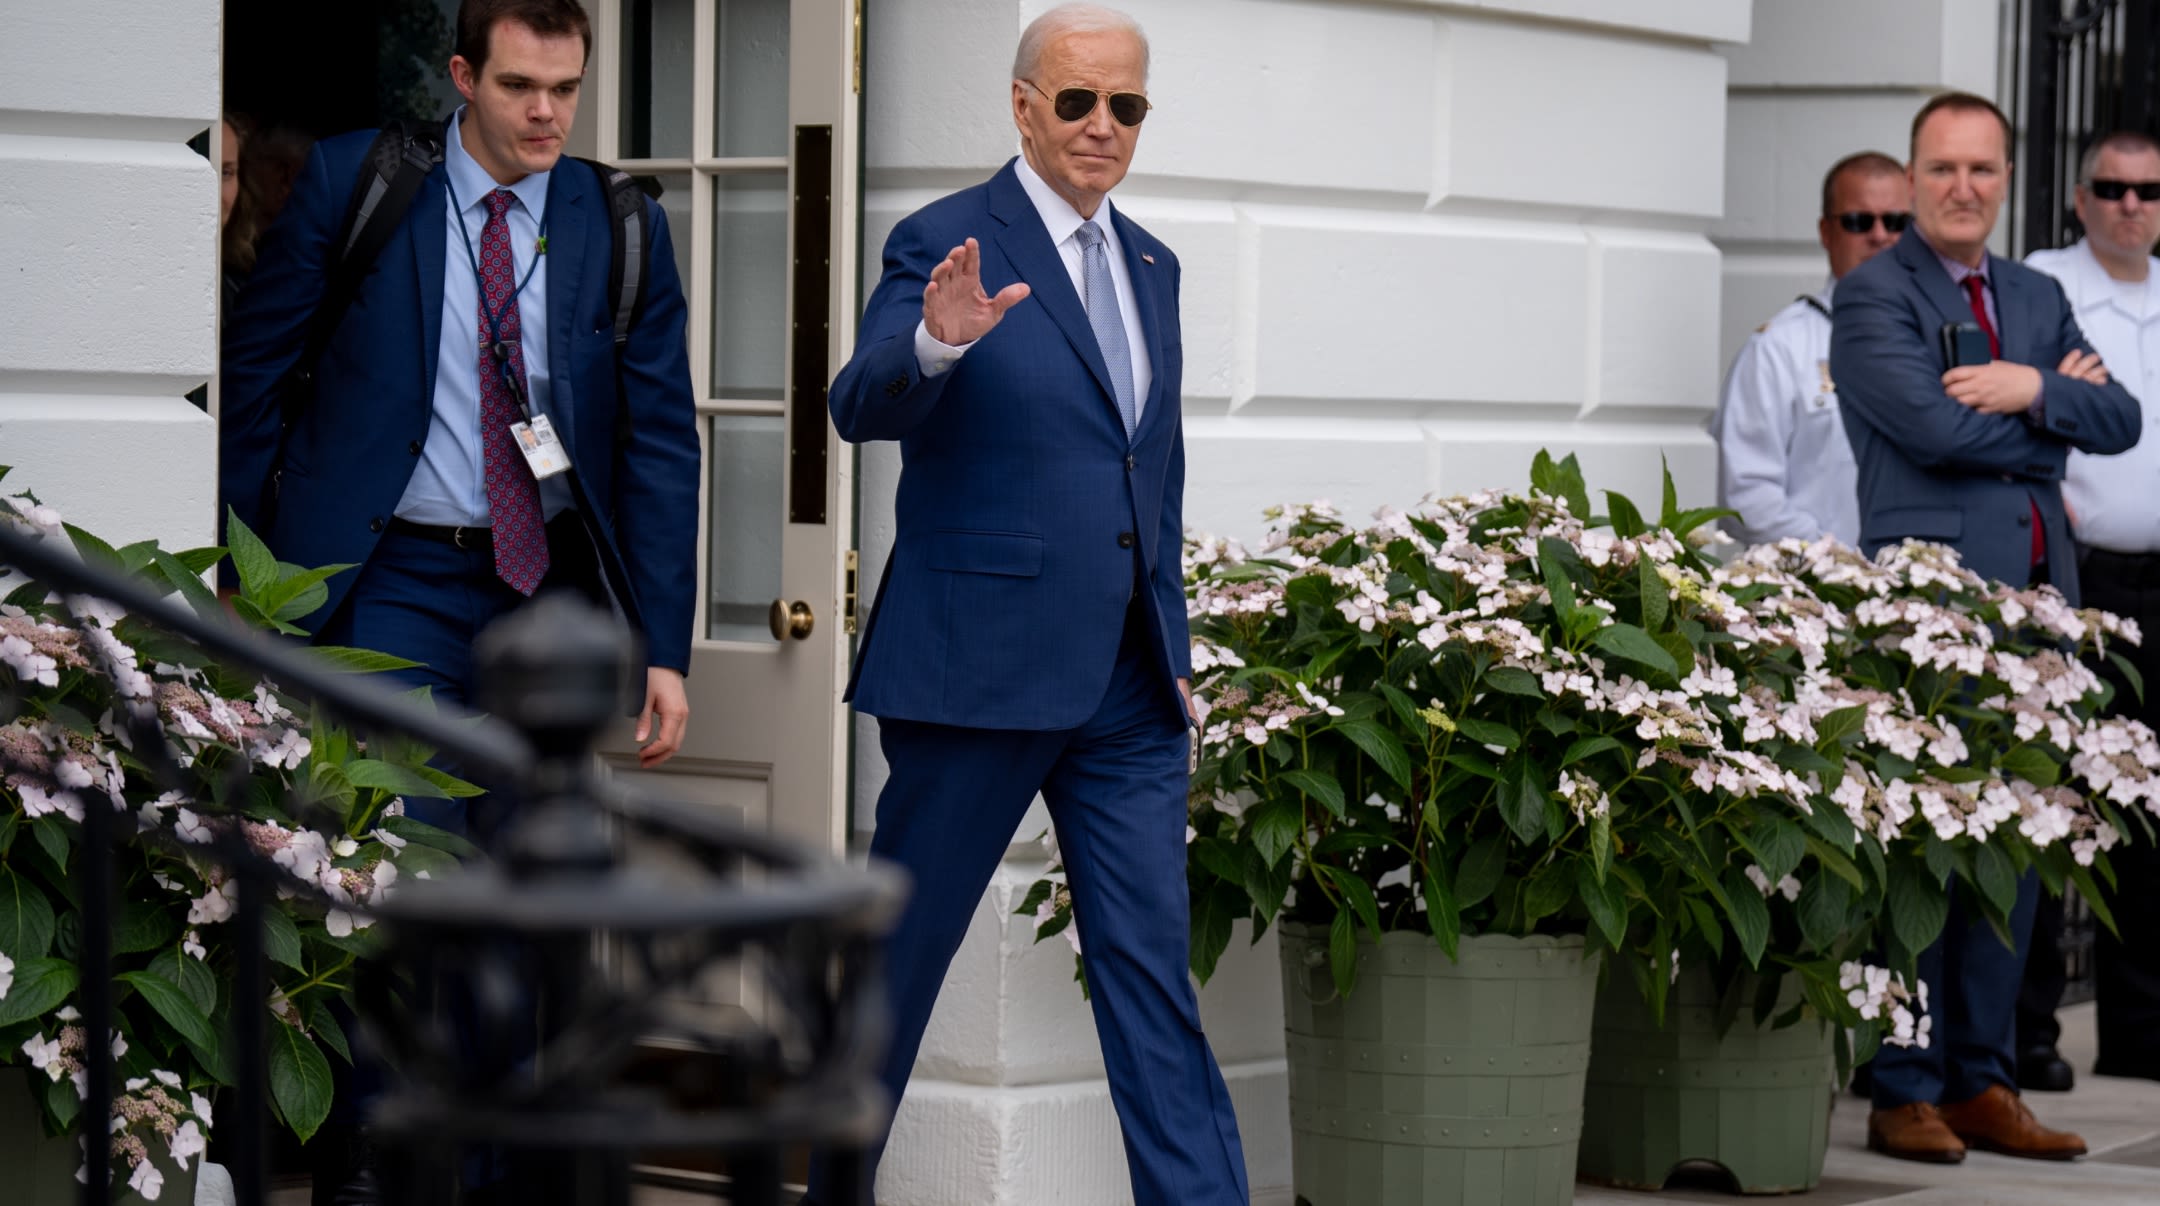 The pro-Israel backlash is harsh after Biden suspends delivery of weapons to Israel - Jewish Telegraphic Agency